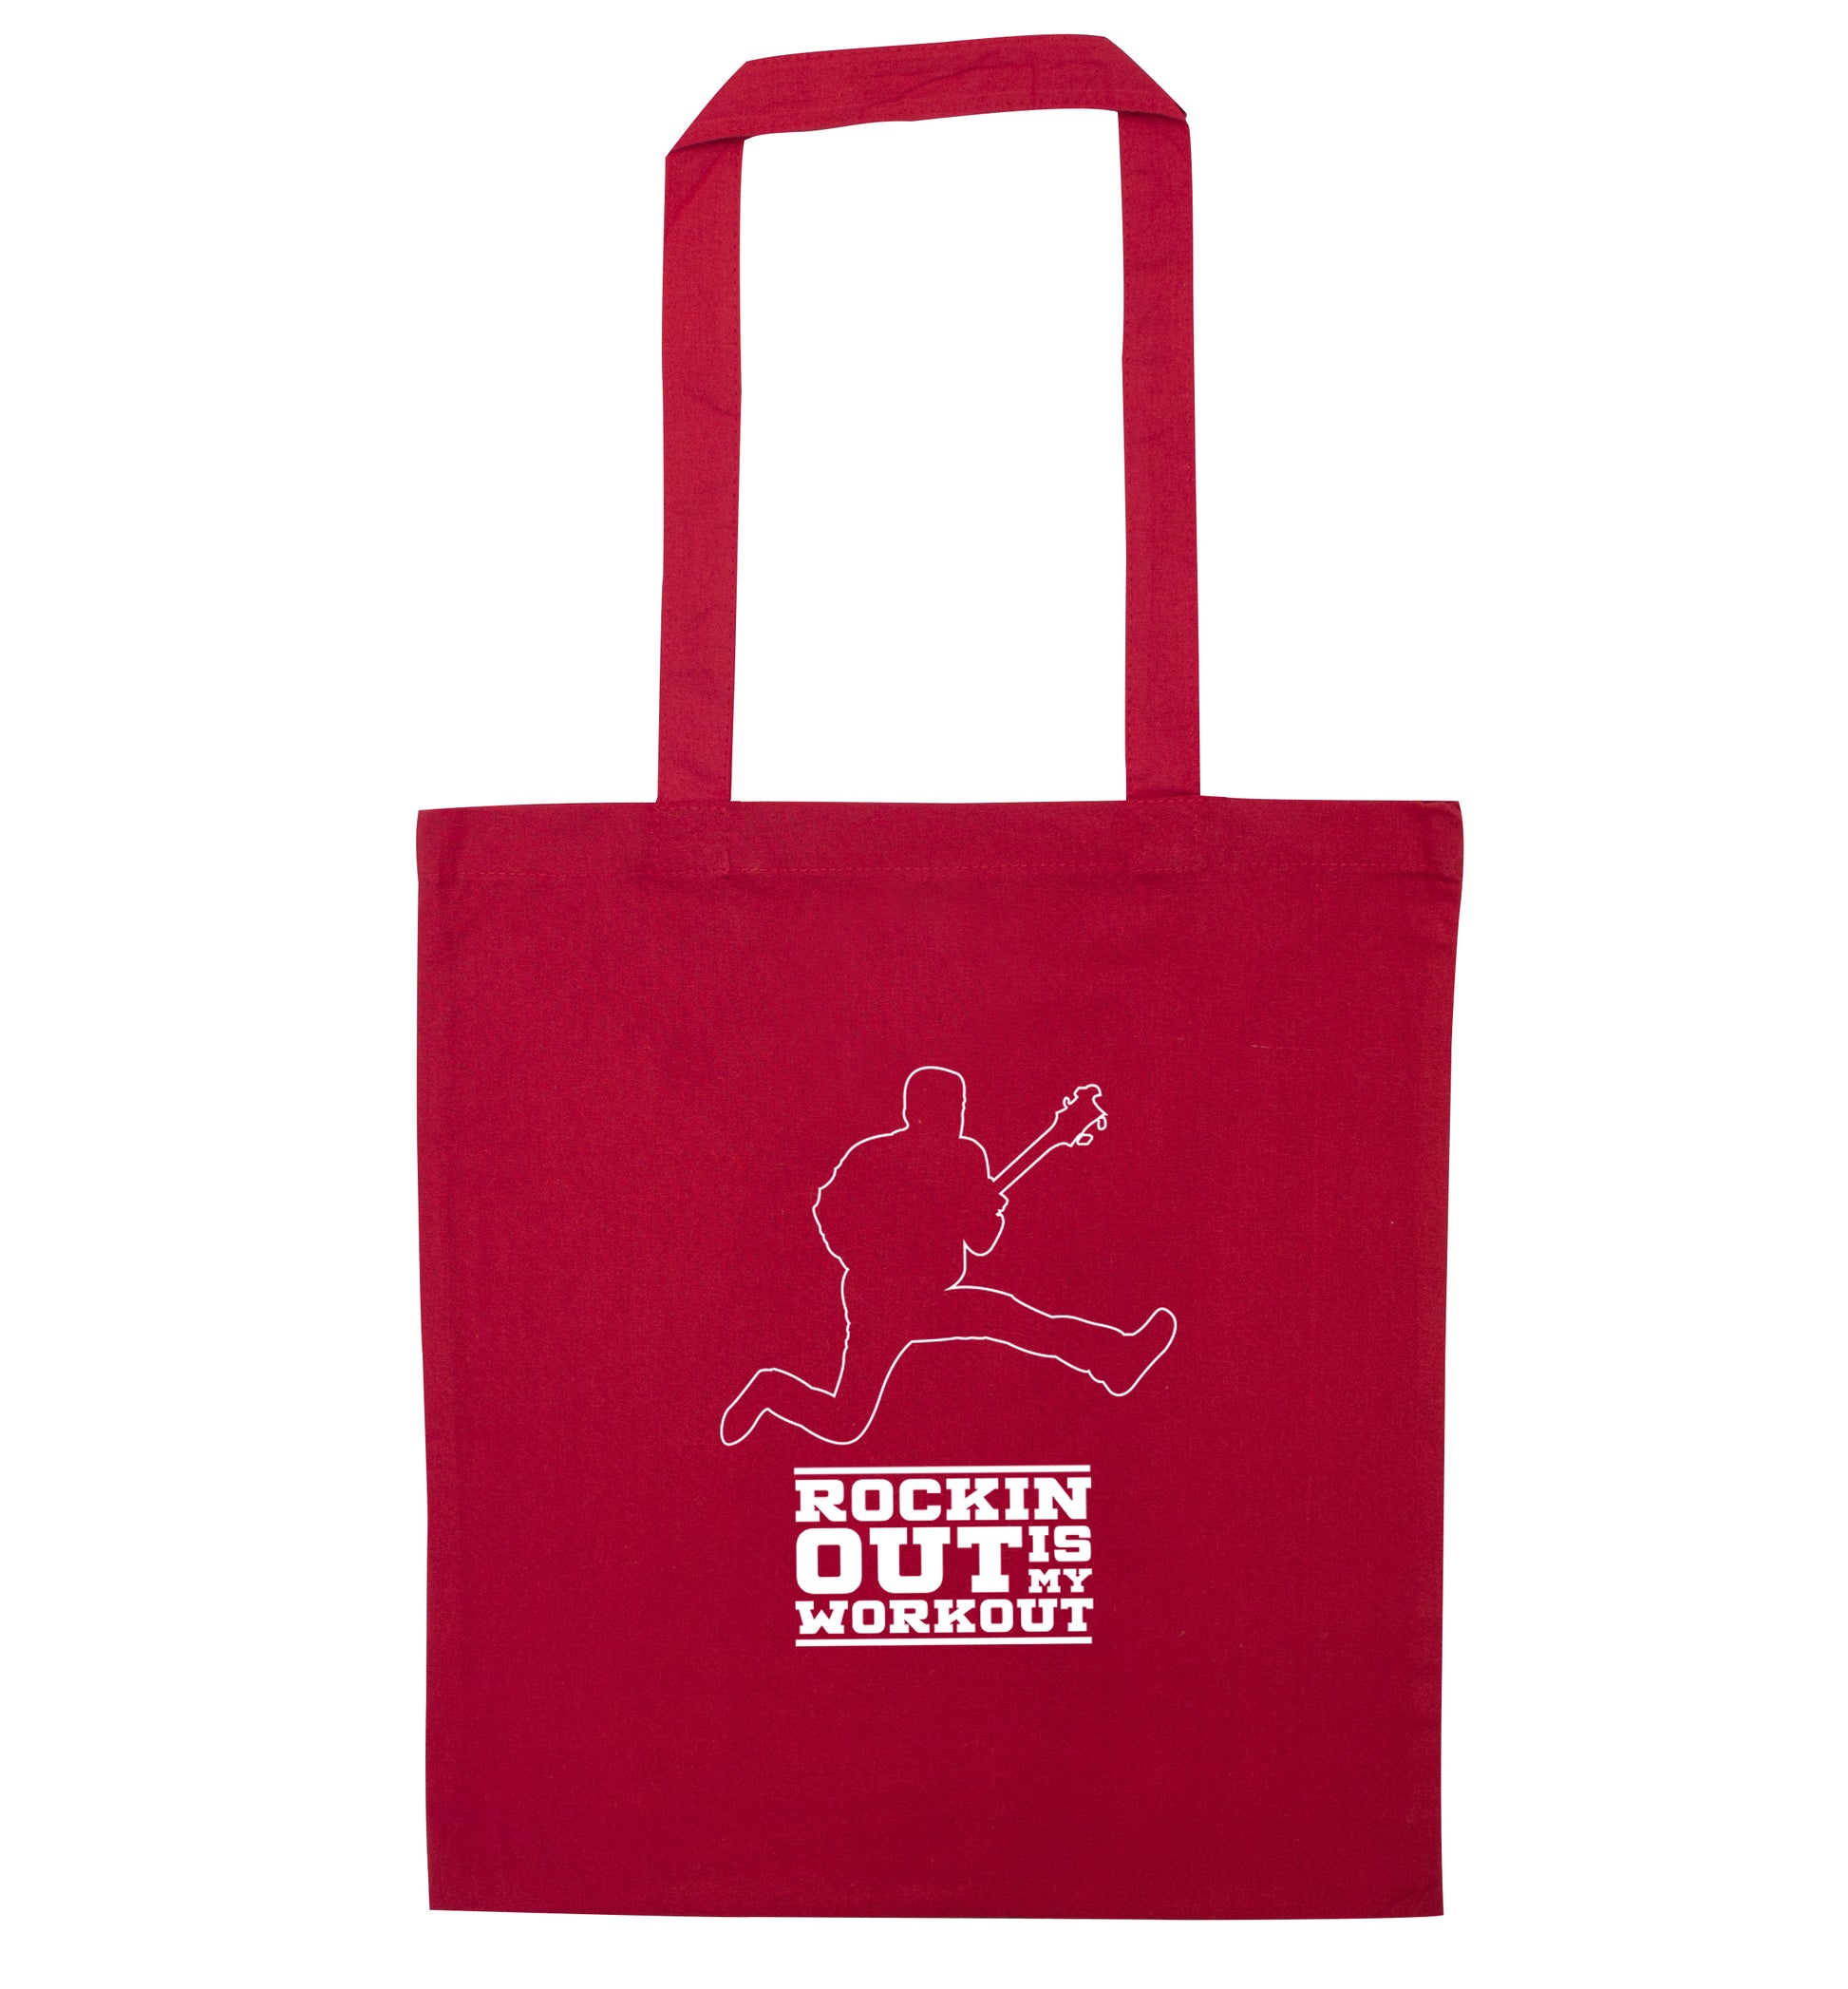 Rockin out is my workout 2 red tote bag